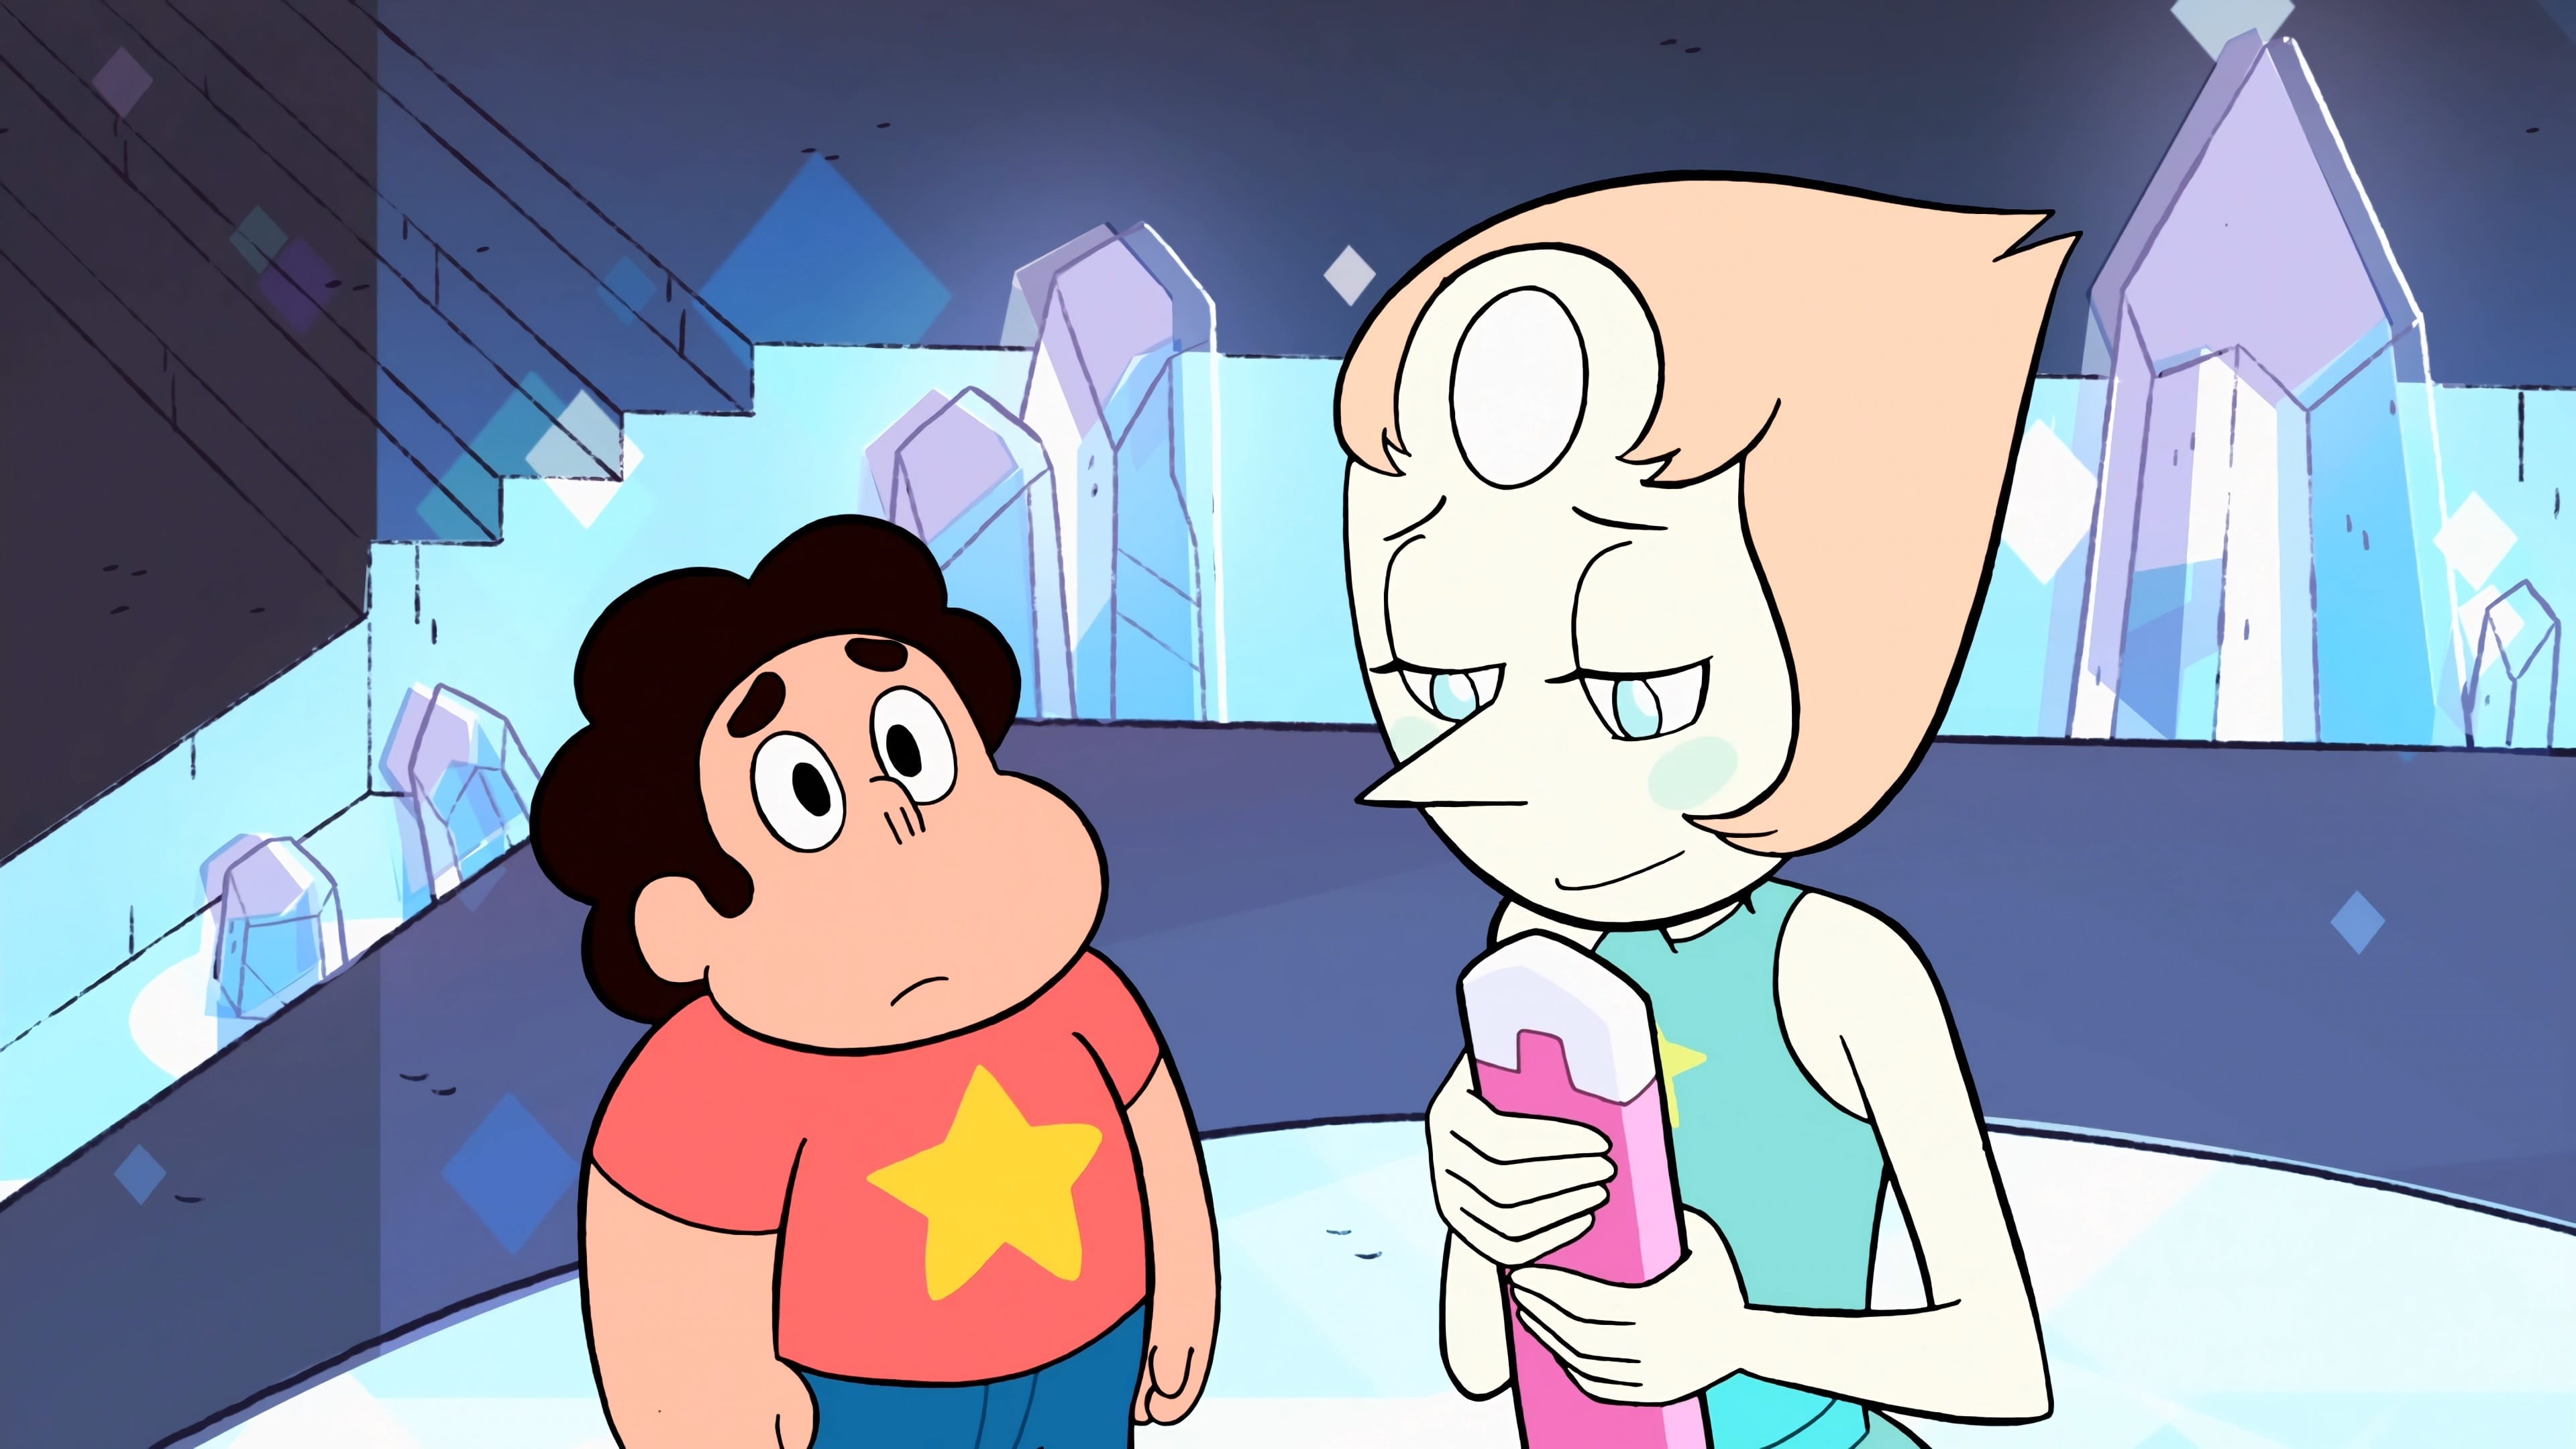 36 Best Images Steven Universe Movie Watch Online Free / Free Watch Steven Universe - Episode : Online TV Shows at ...